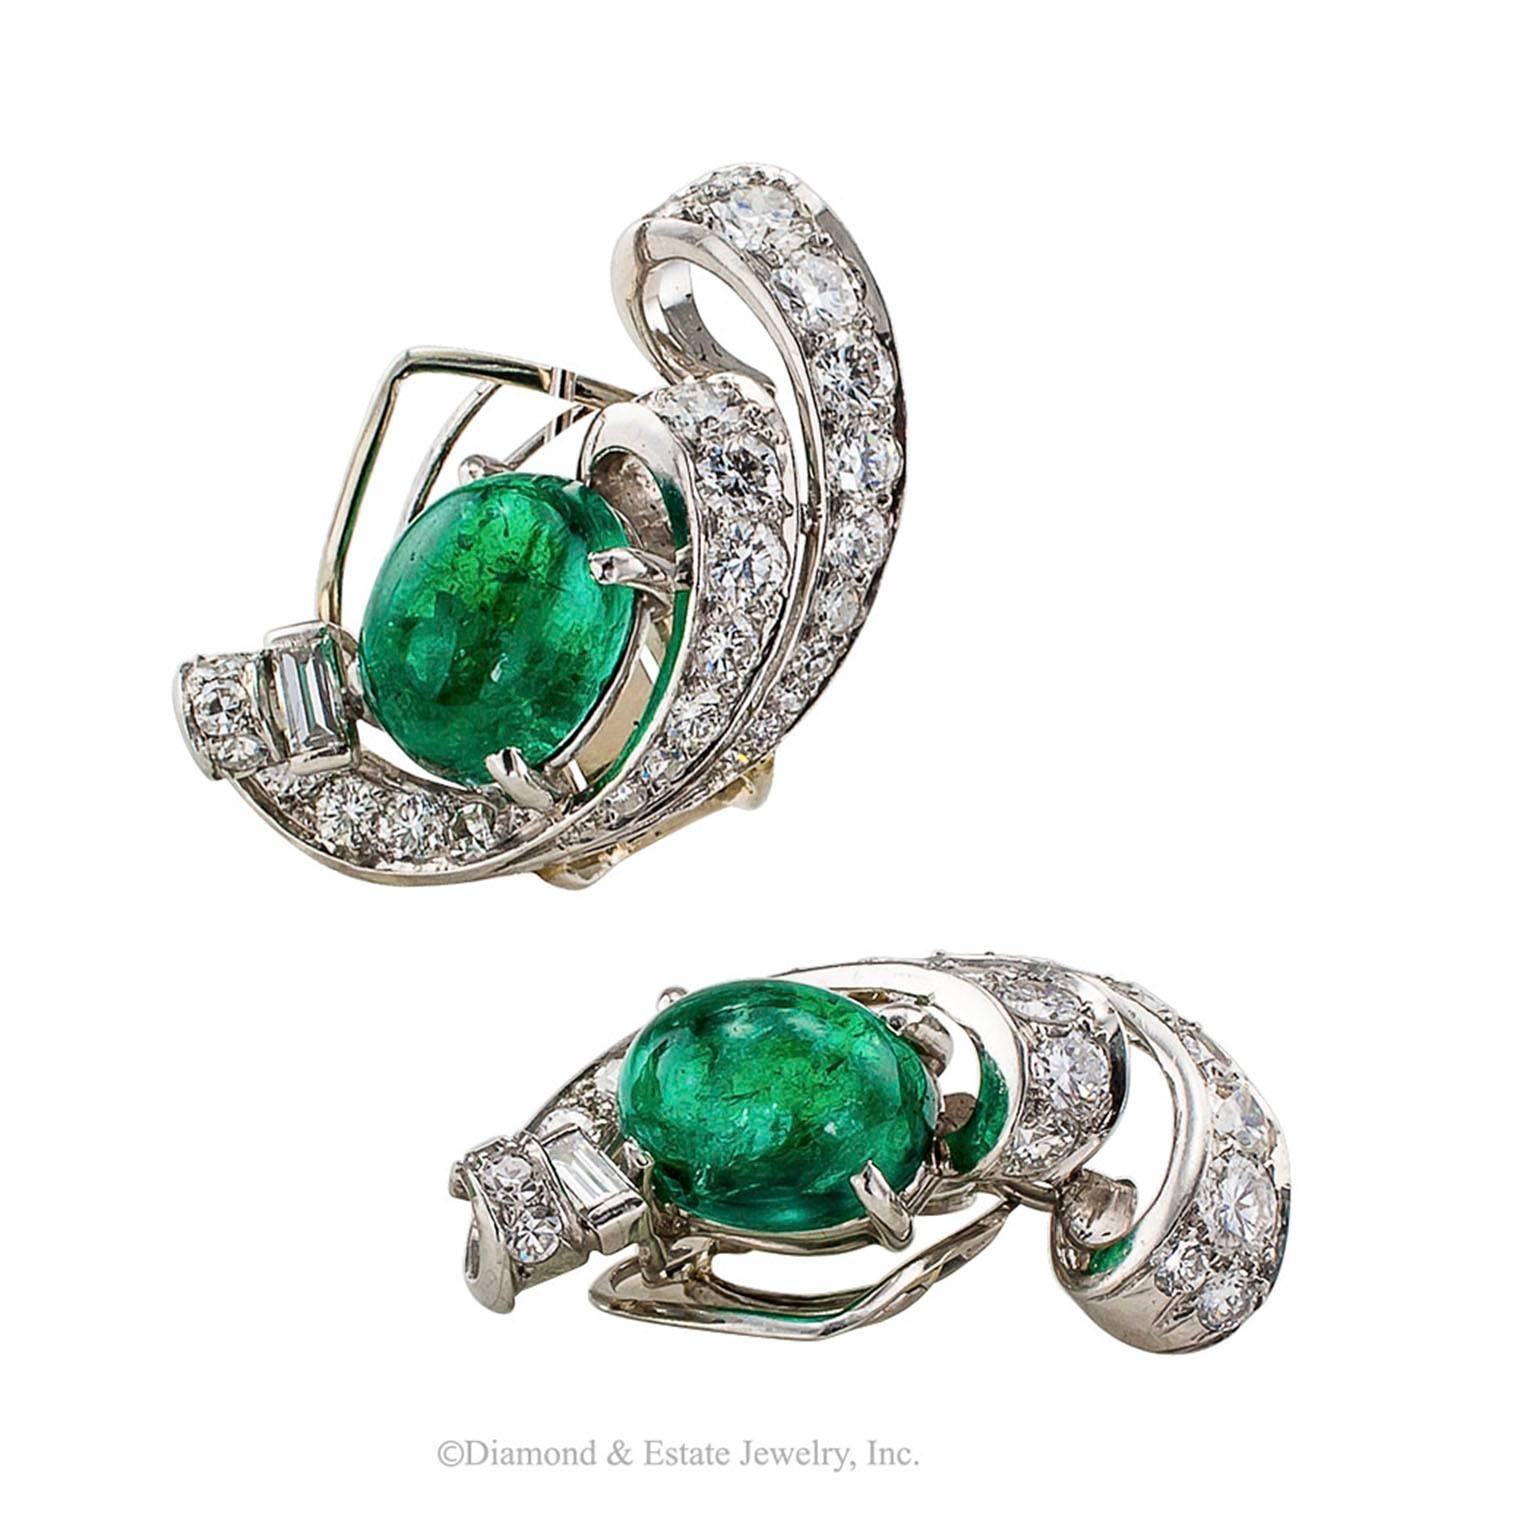 1930s Emerald Diamond Platinum Ear Clips

1930s cabochon emerald diamond and platinum button ear clips.  Featuring a pair of jelly bean like cabochon emeralds together weighing approximately 4.75 carats, nestled in between open scrolling motifs set